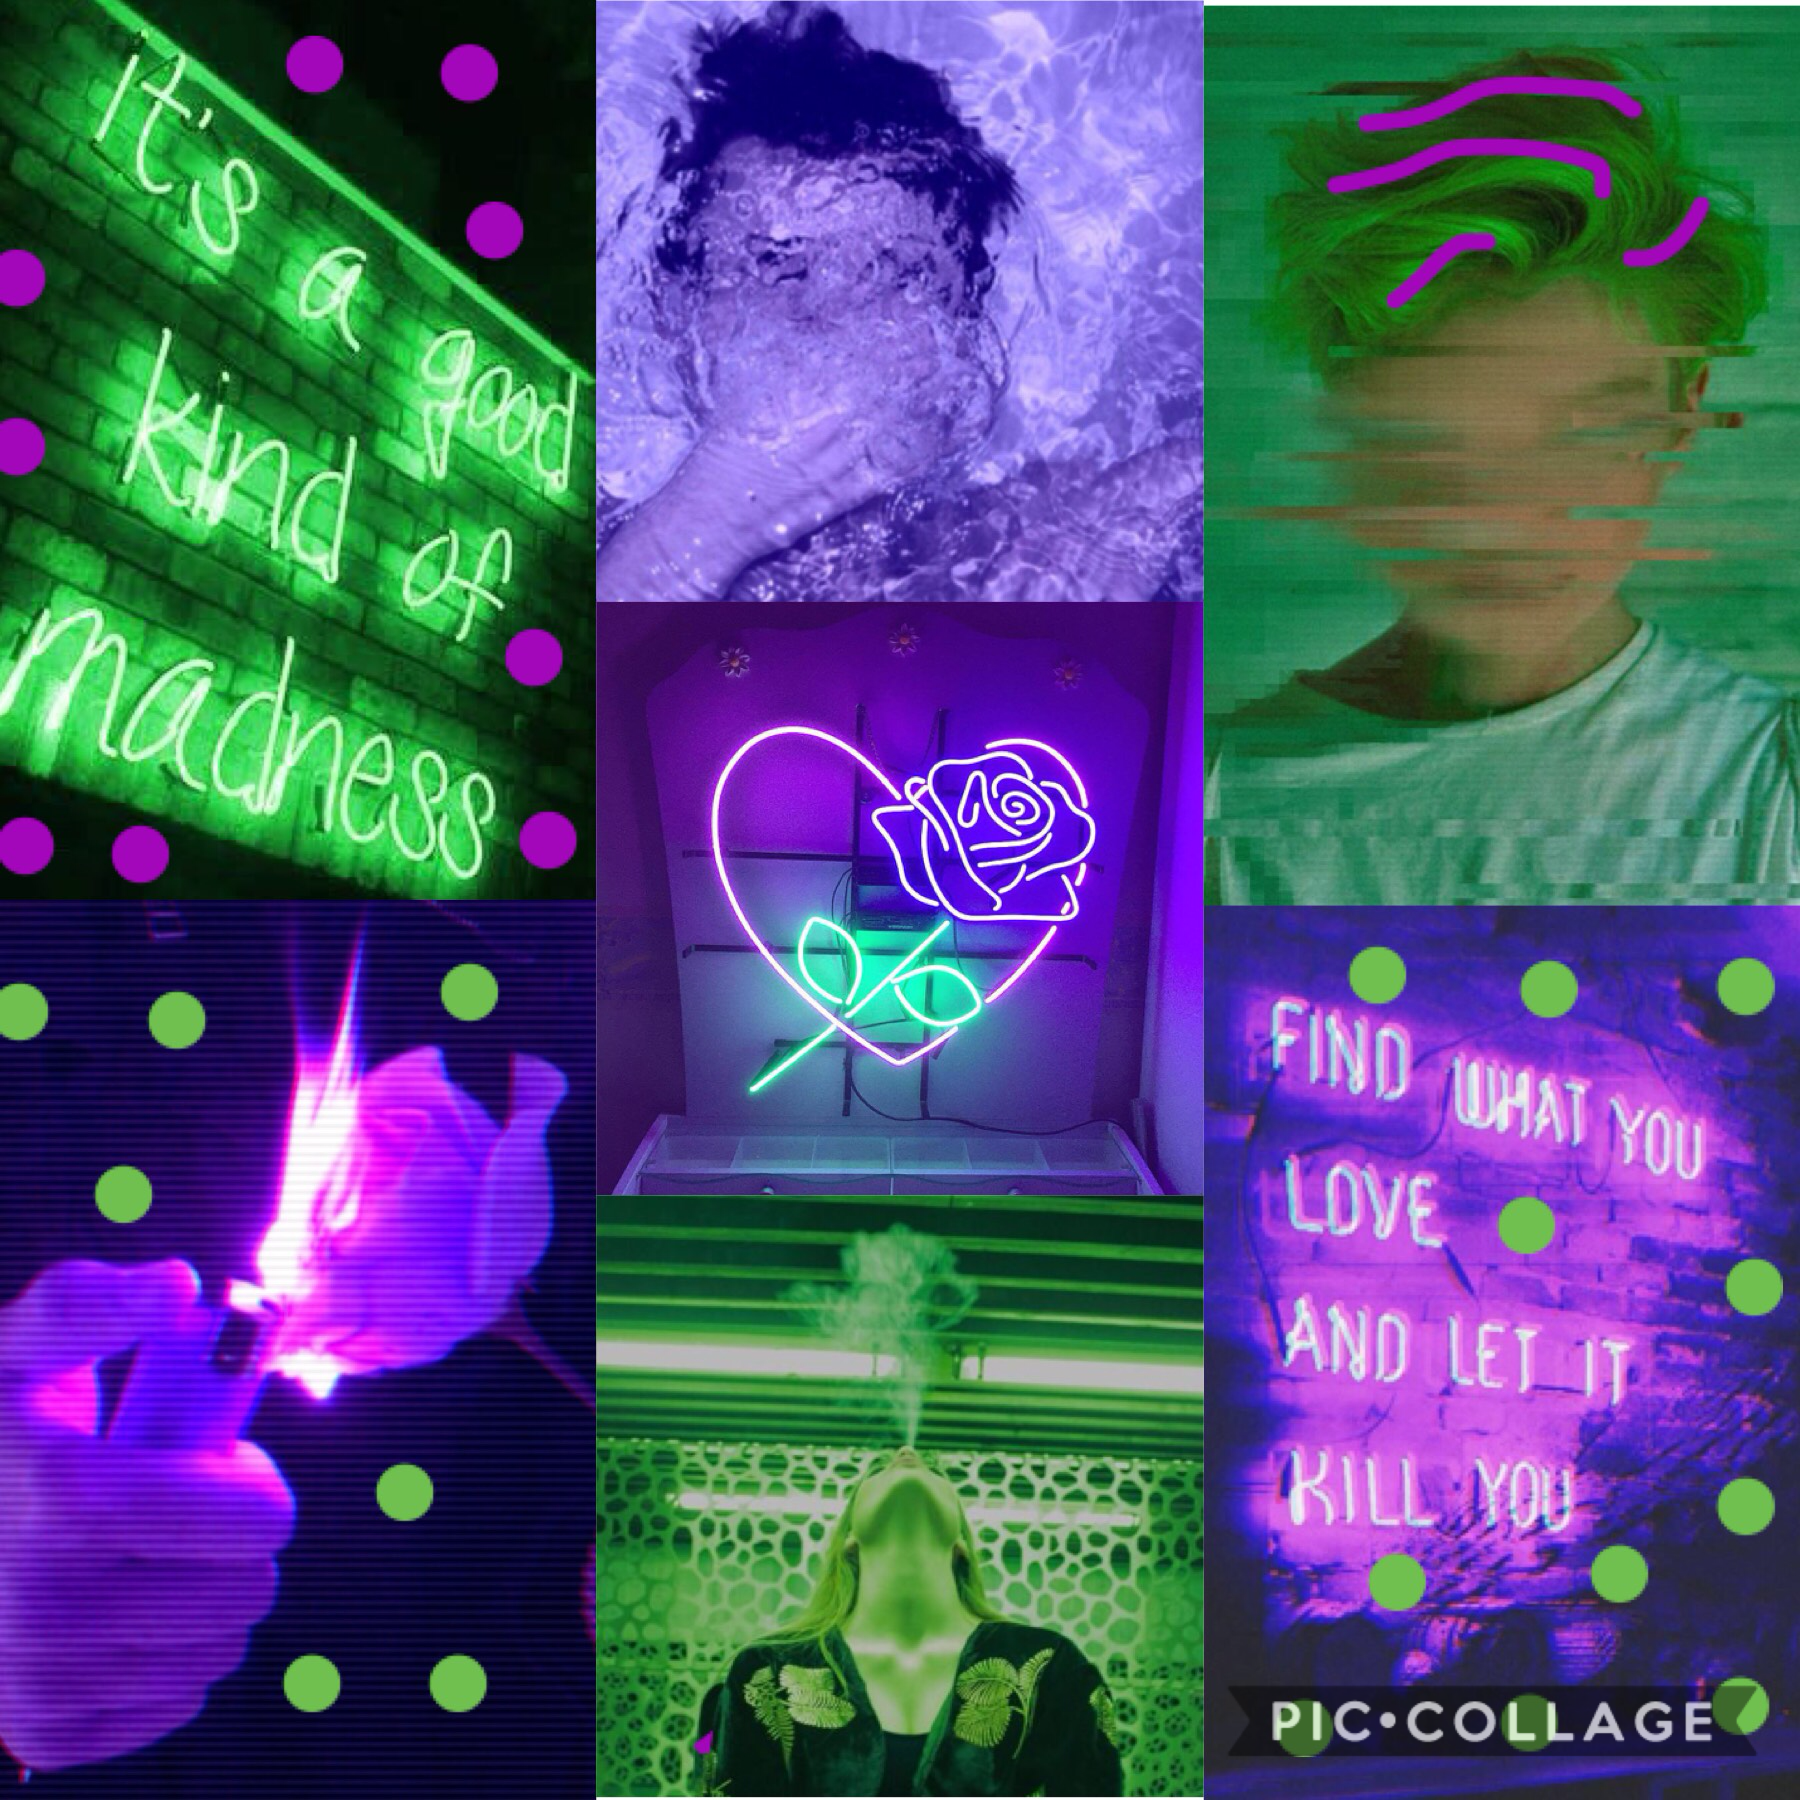 💚 Don't green and purple just go well with each other? 💜